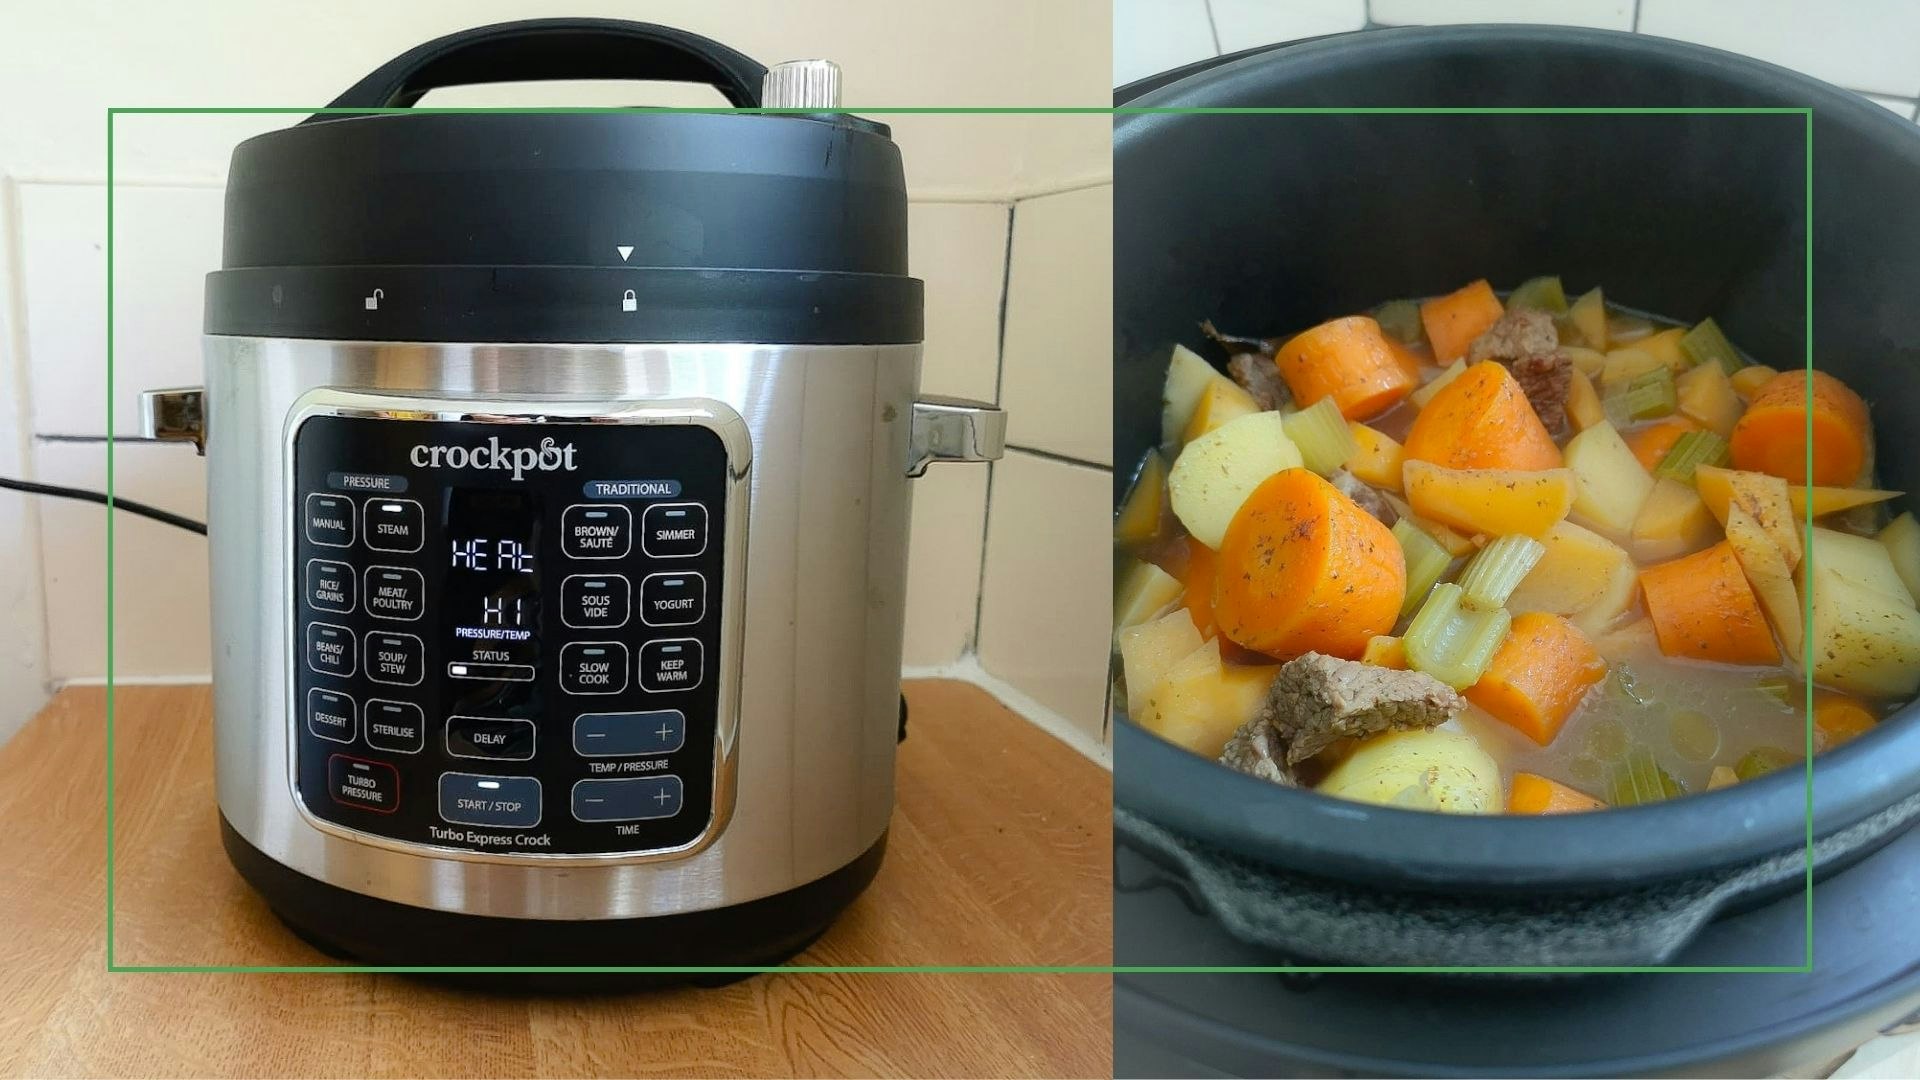 Crockpot Turbo Express Pressure Multicooker 14-in-1 Review